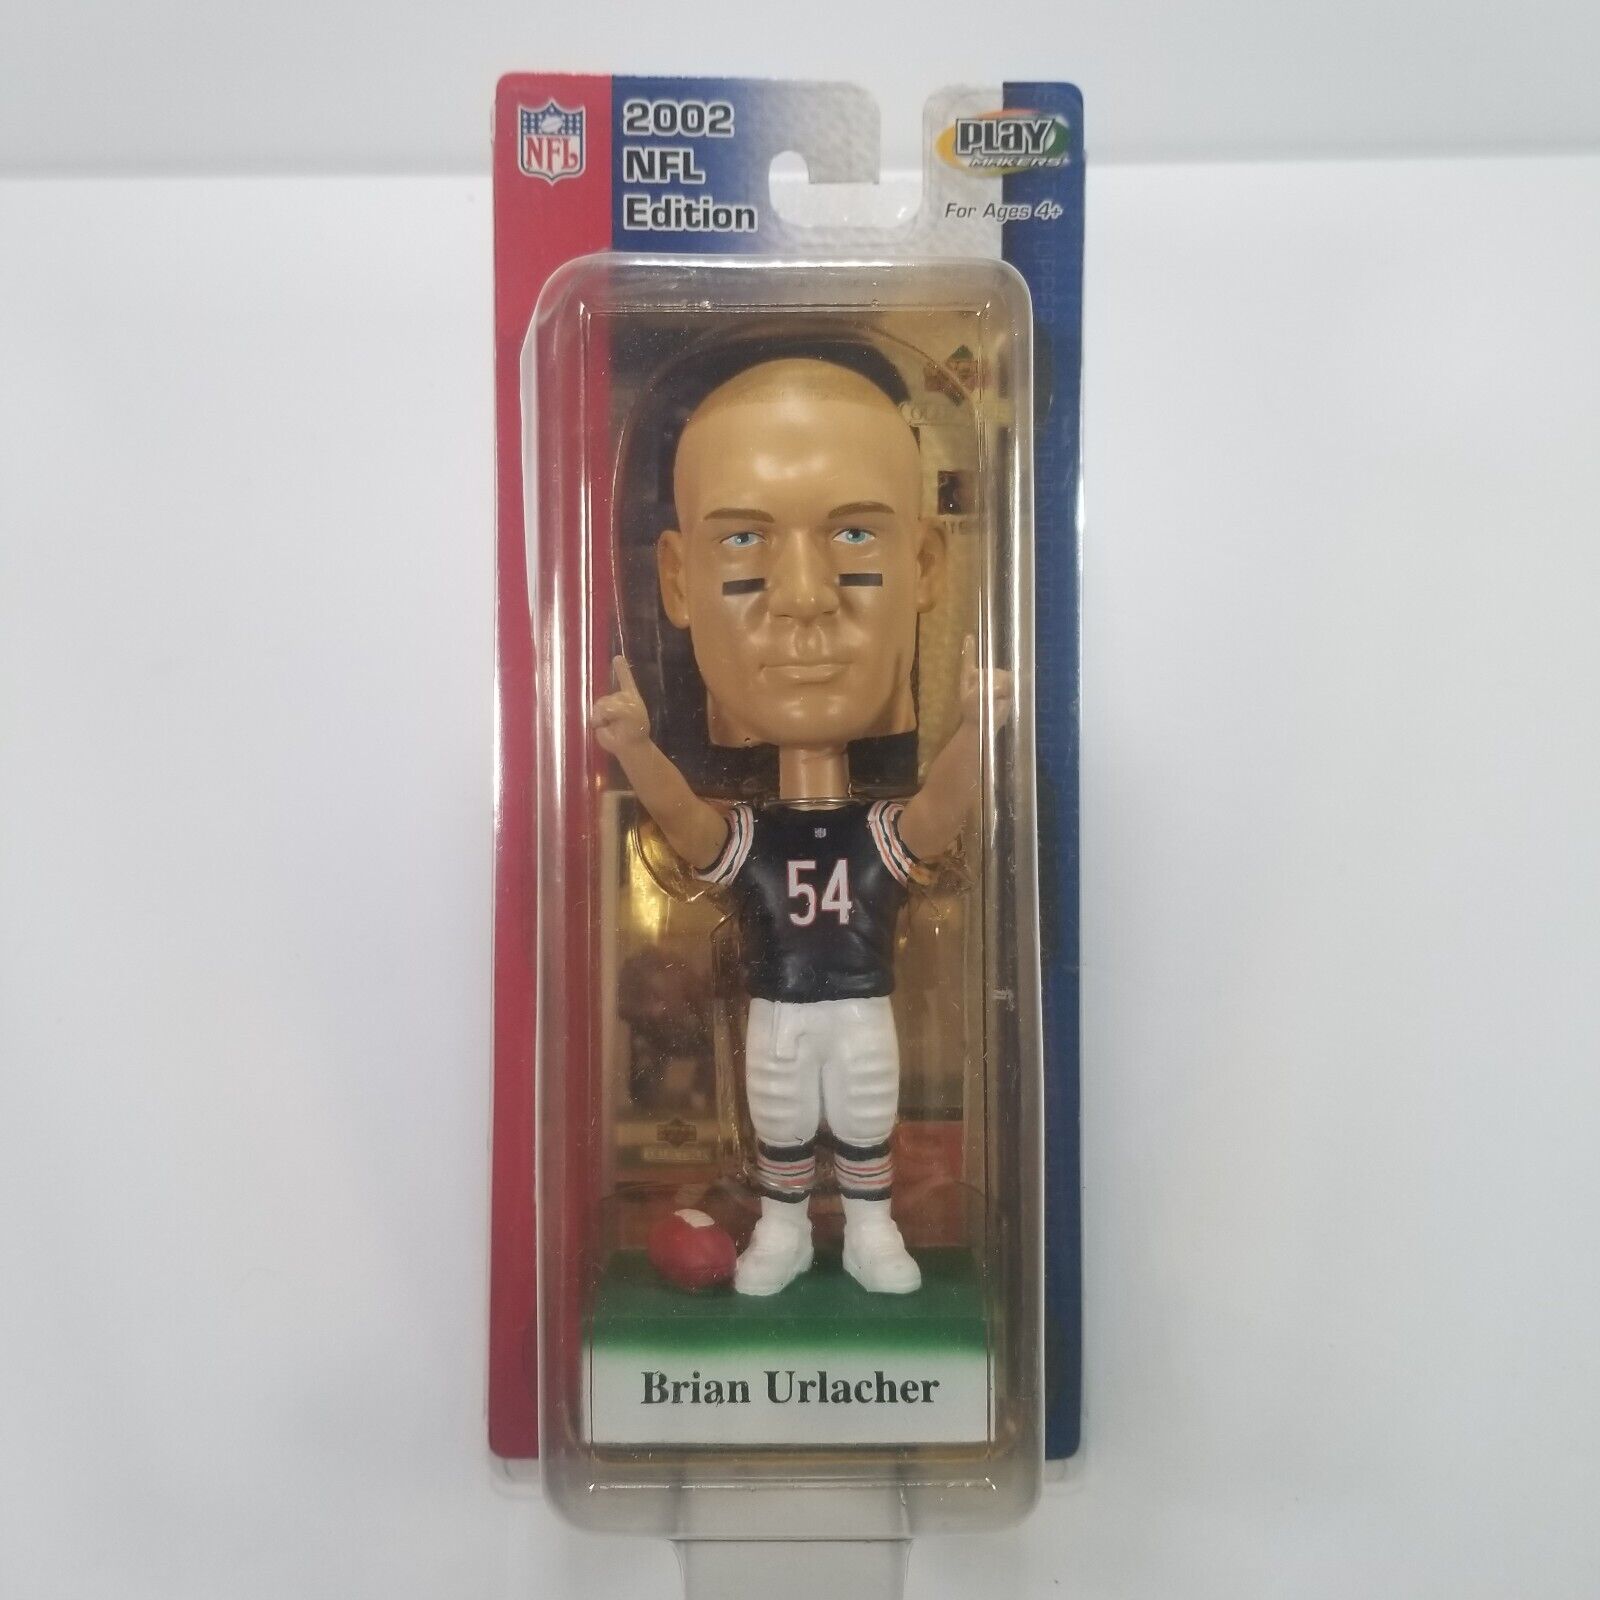 2002 NFL Brian Urlacher Bobble Head Figurine With Players Card Unopened NOS